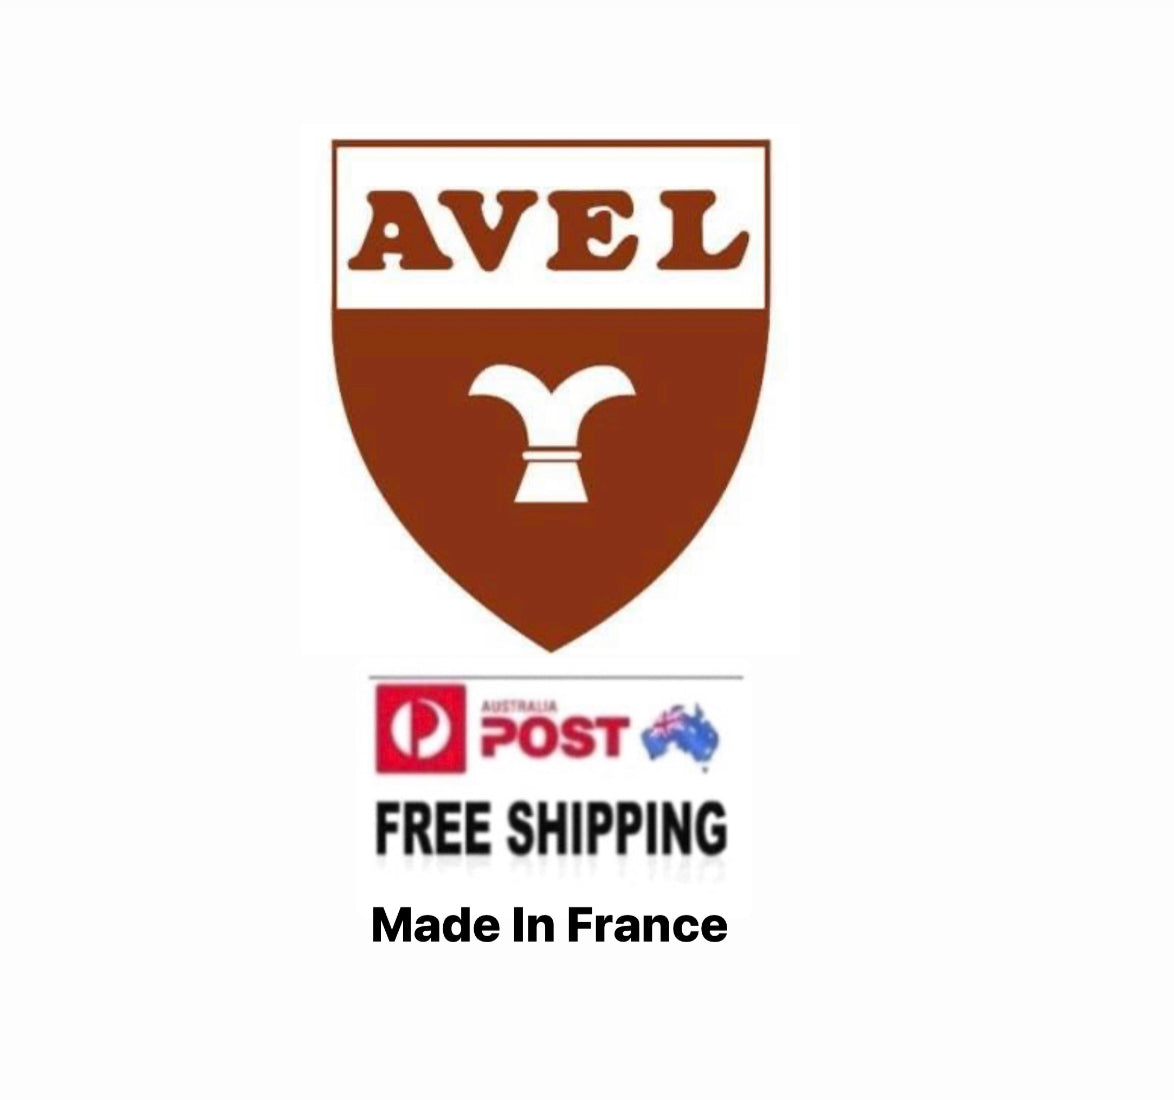 Avel Savon Cuir Lisse Leather Soap Cleaner Sponge Applicator 100g Made In France